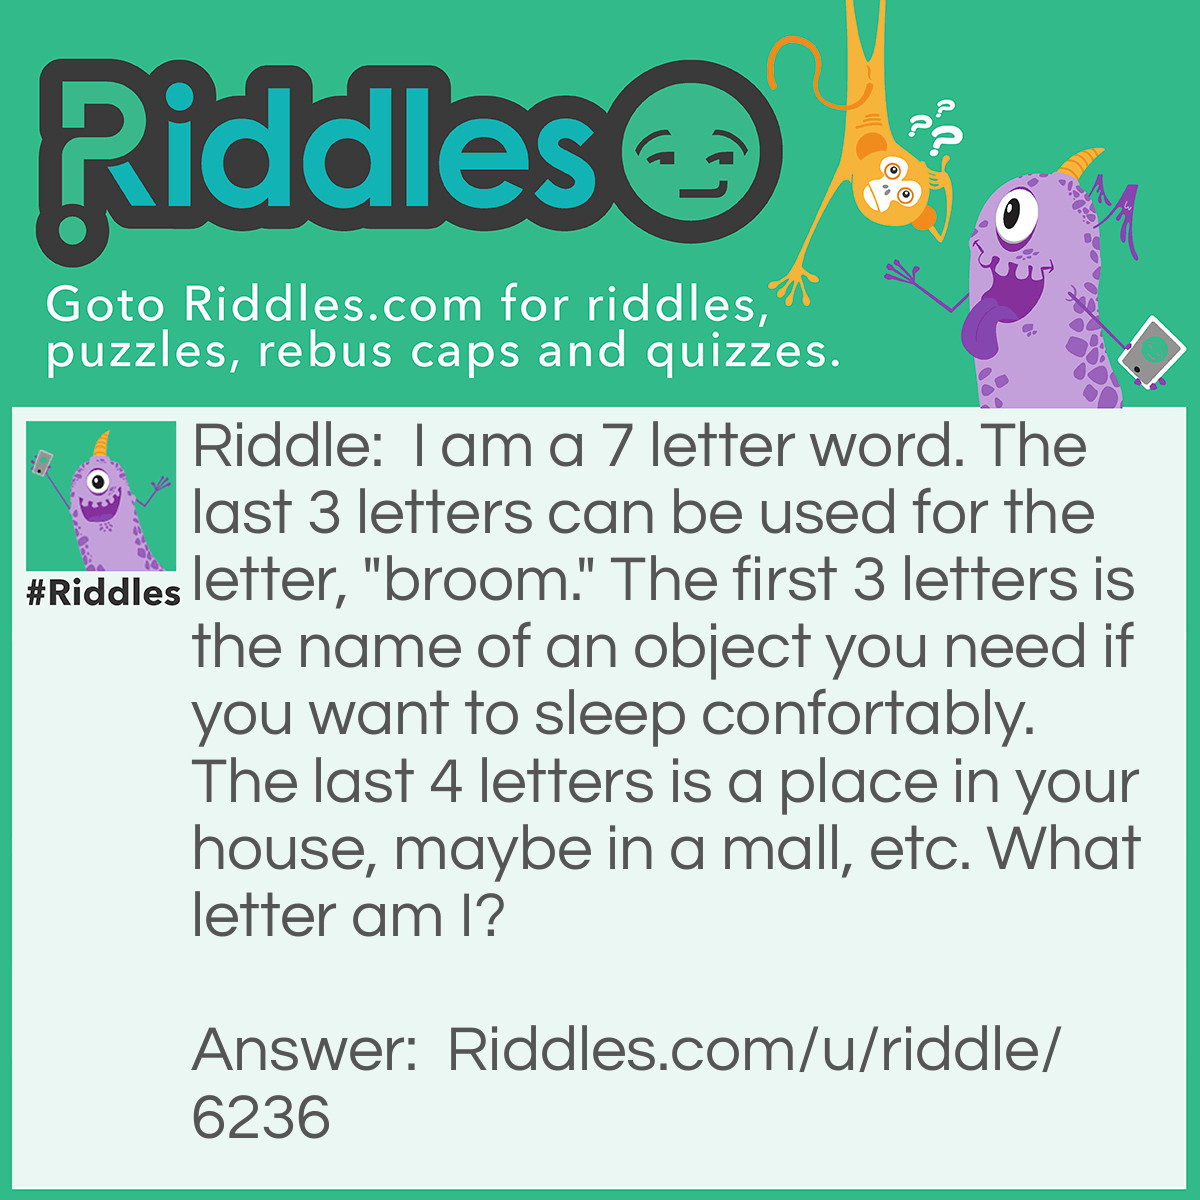 Riddle: I am a 7 letter word. The last 3 letters can be used for the letter, "broom." The first 3 letters is the name of an object you need if you want to sleep confortably. The last 4 letters is a place in your house, maybe in a mall, etc. What letter am I? Answer: Bedroom! >:D